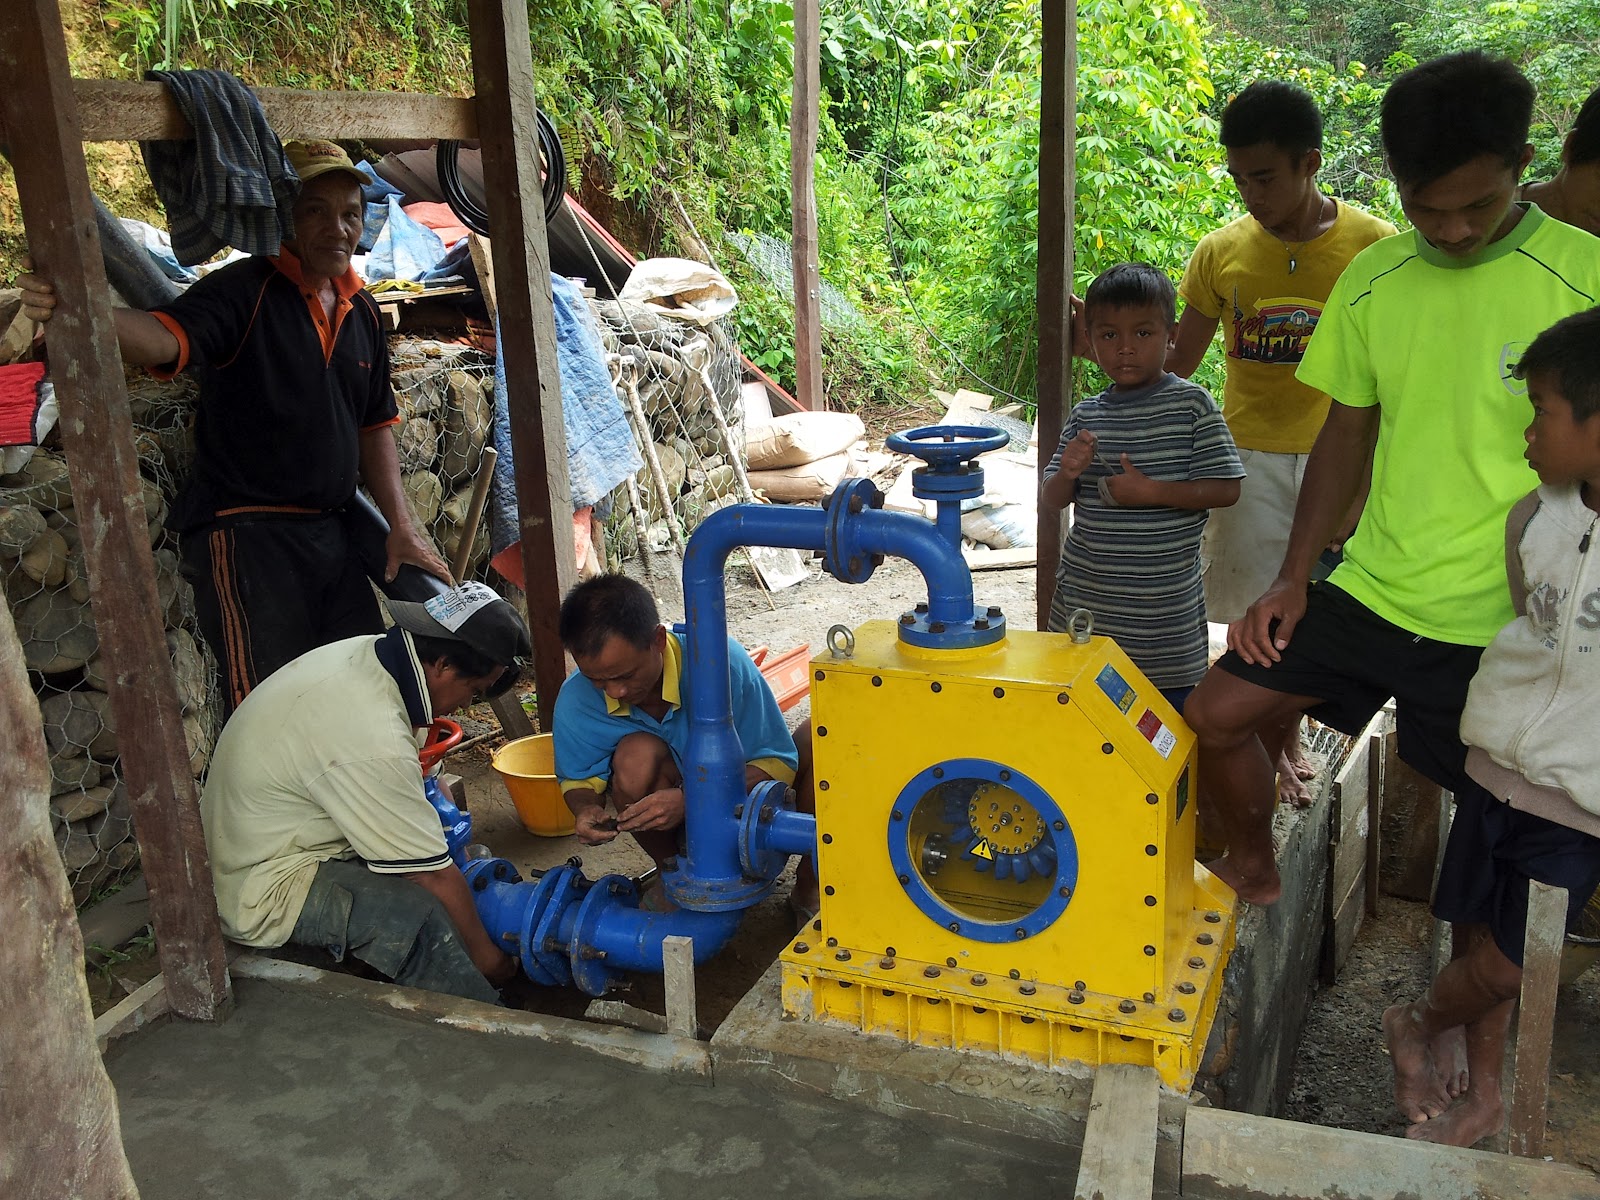 From the youth to the elderly, everyone gets involved in setting up the micry-hydro system for the Murut community in Kg Babalitan (pic courtesy of Adrian Lasimbang)